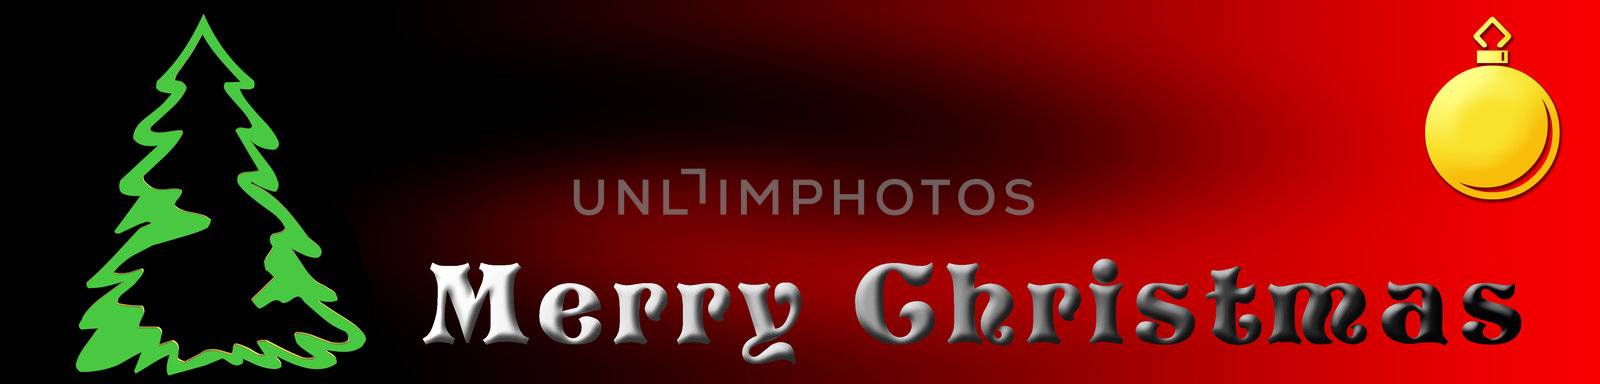 Illustration of Christmas for web banners or graphics
